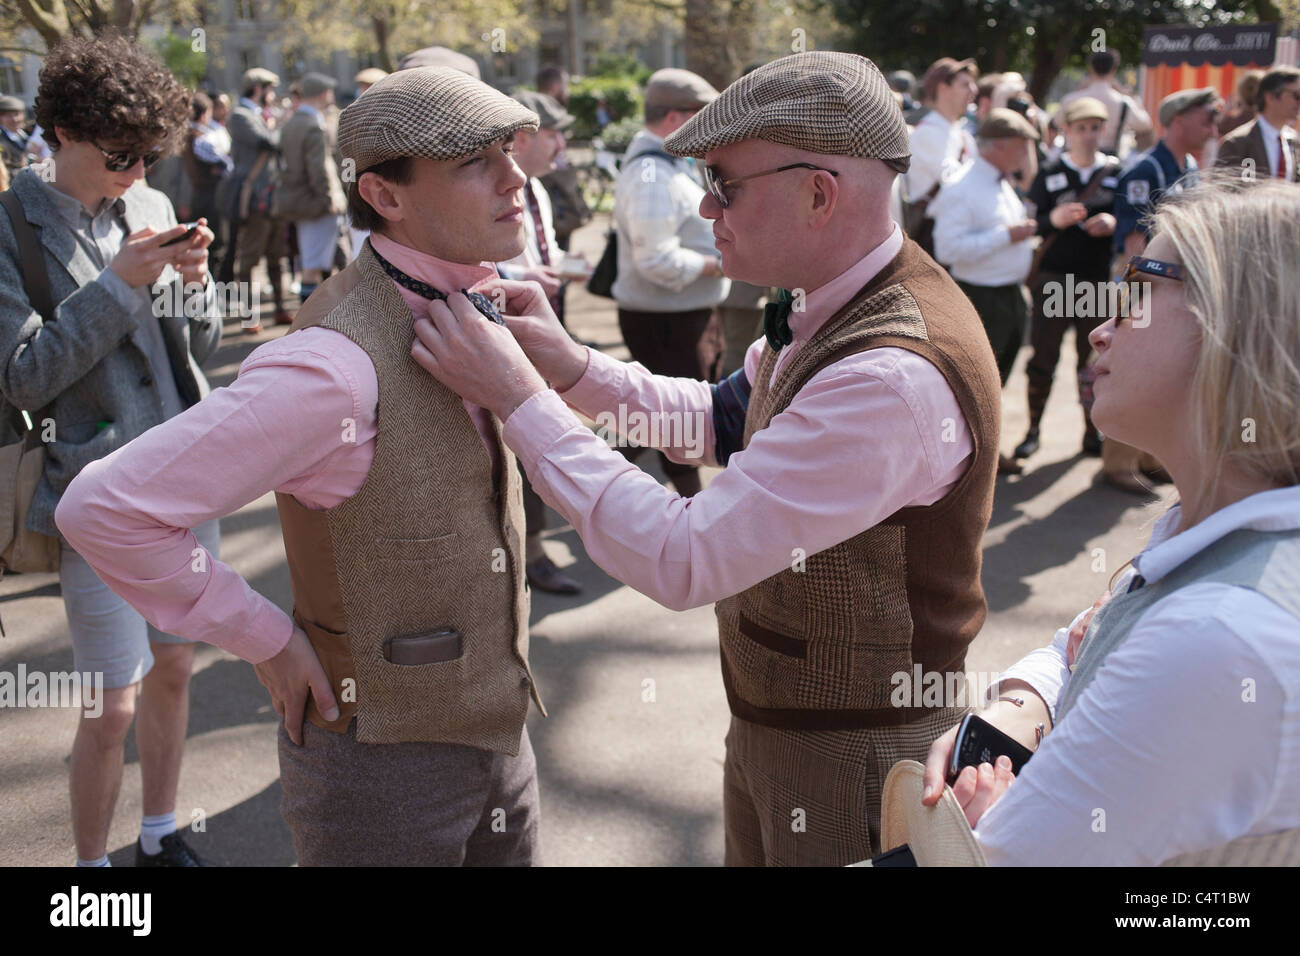 A man in a tweed vest fixes the bow tie on his matching friend at the London Tweed Run, 2011 Stock Photo